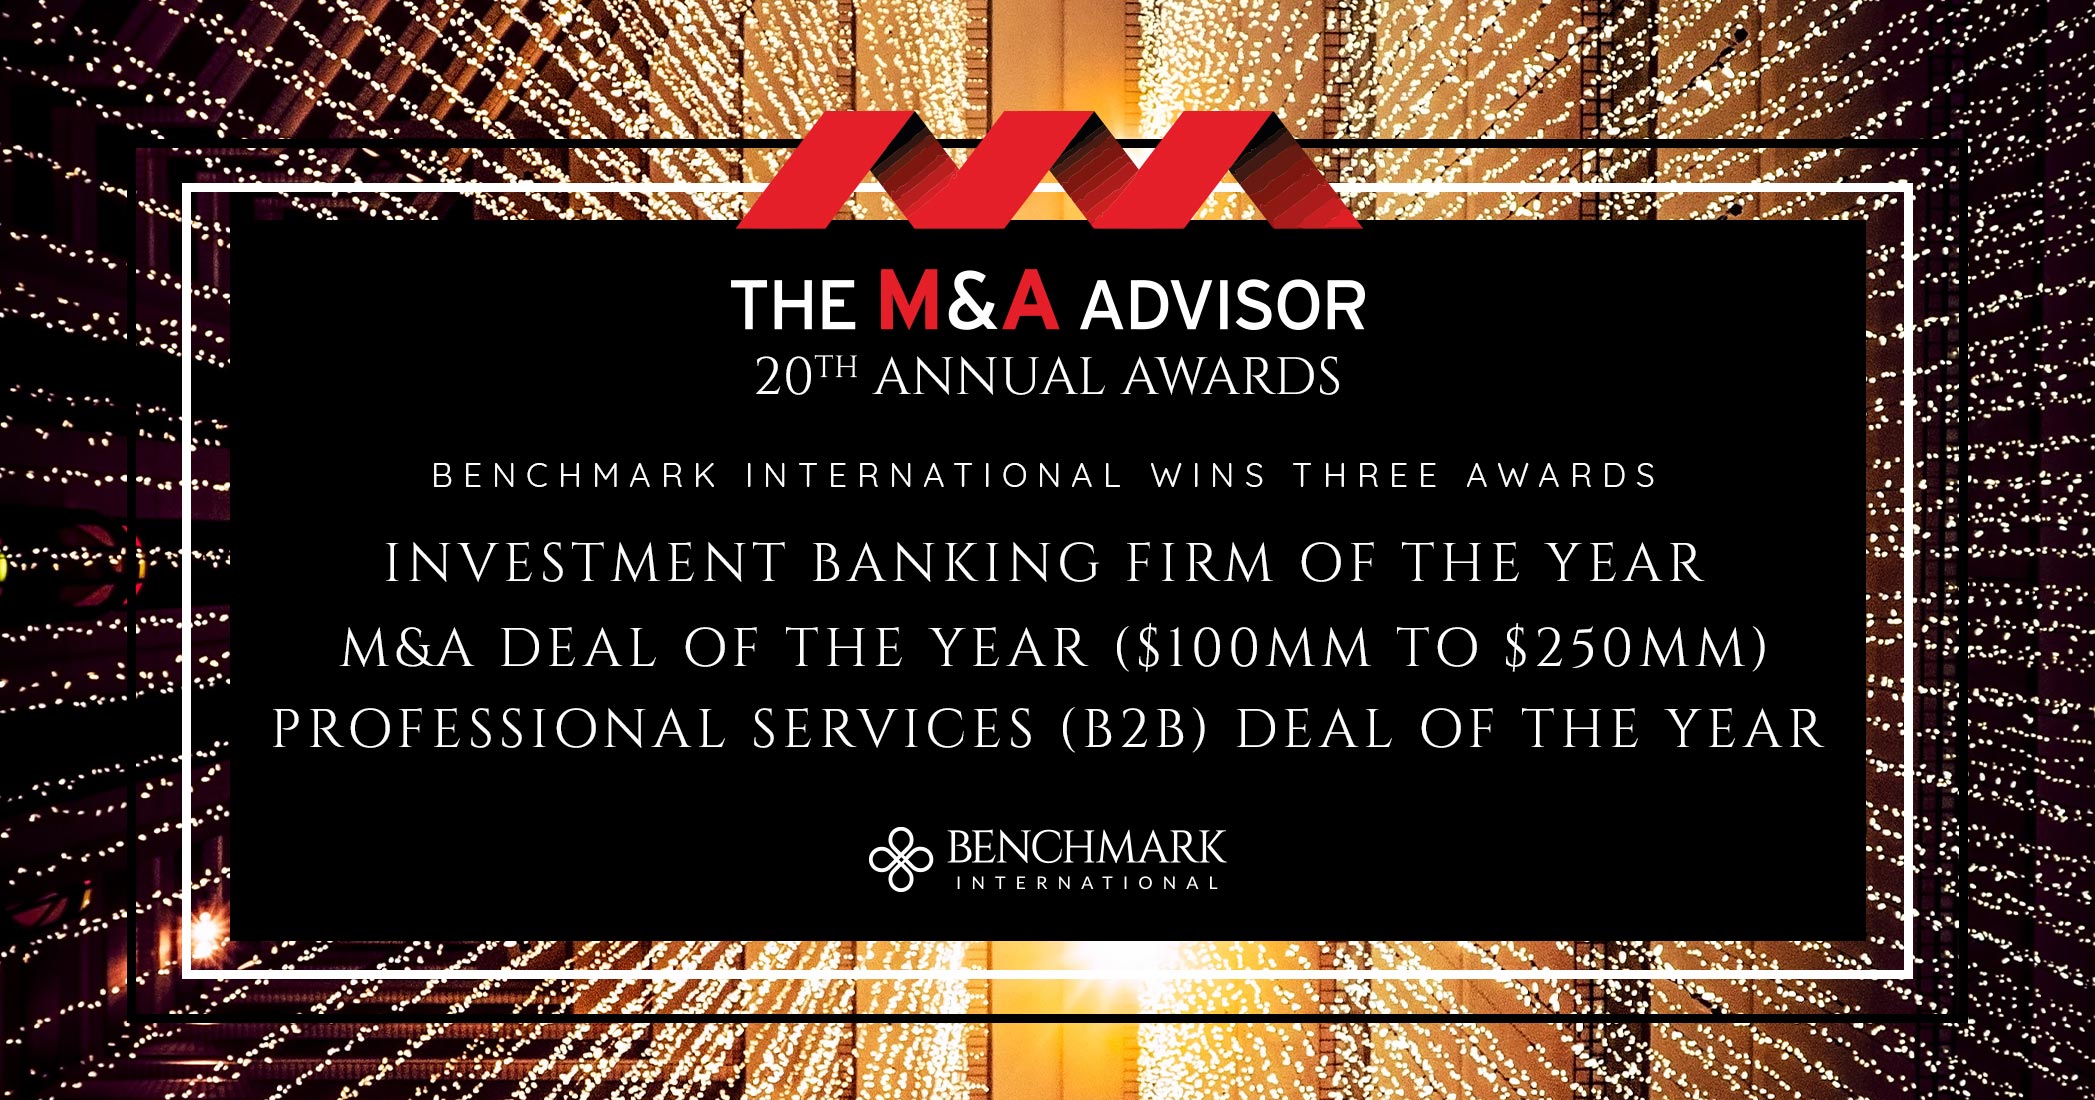 Benchmark International Wins Several M&A Advisor Awards: Investment Banking Firm Of The Year, M&A Deal Of The Year ($100M-$250M), Professional Services (B2B) Deal Of The Year